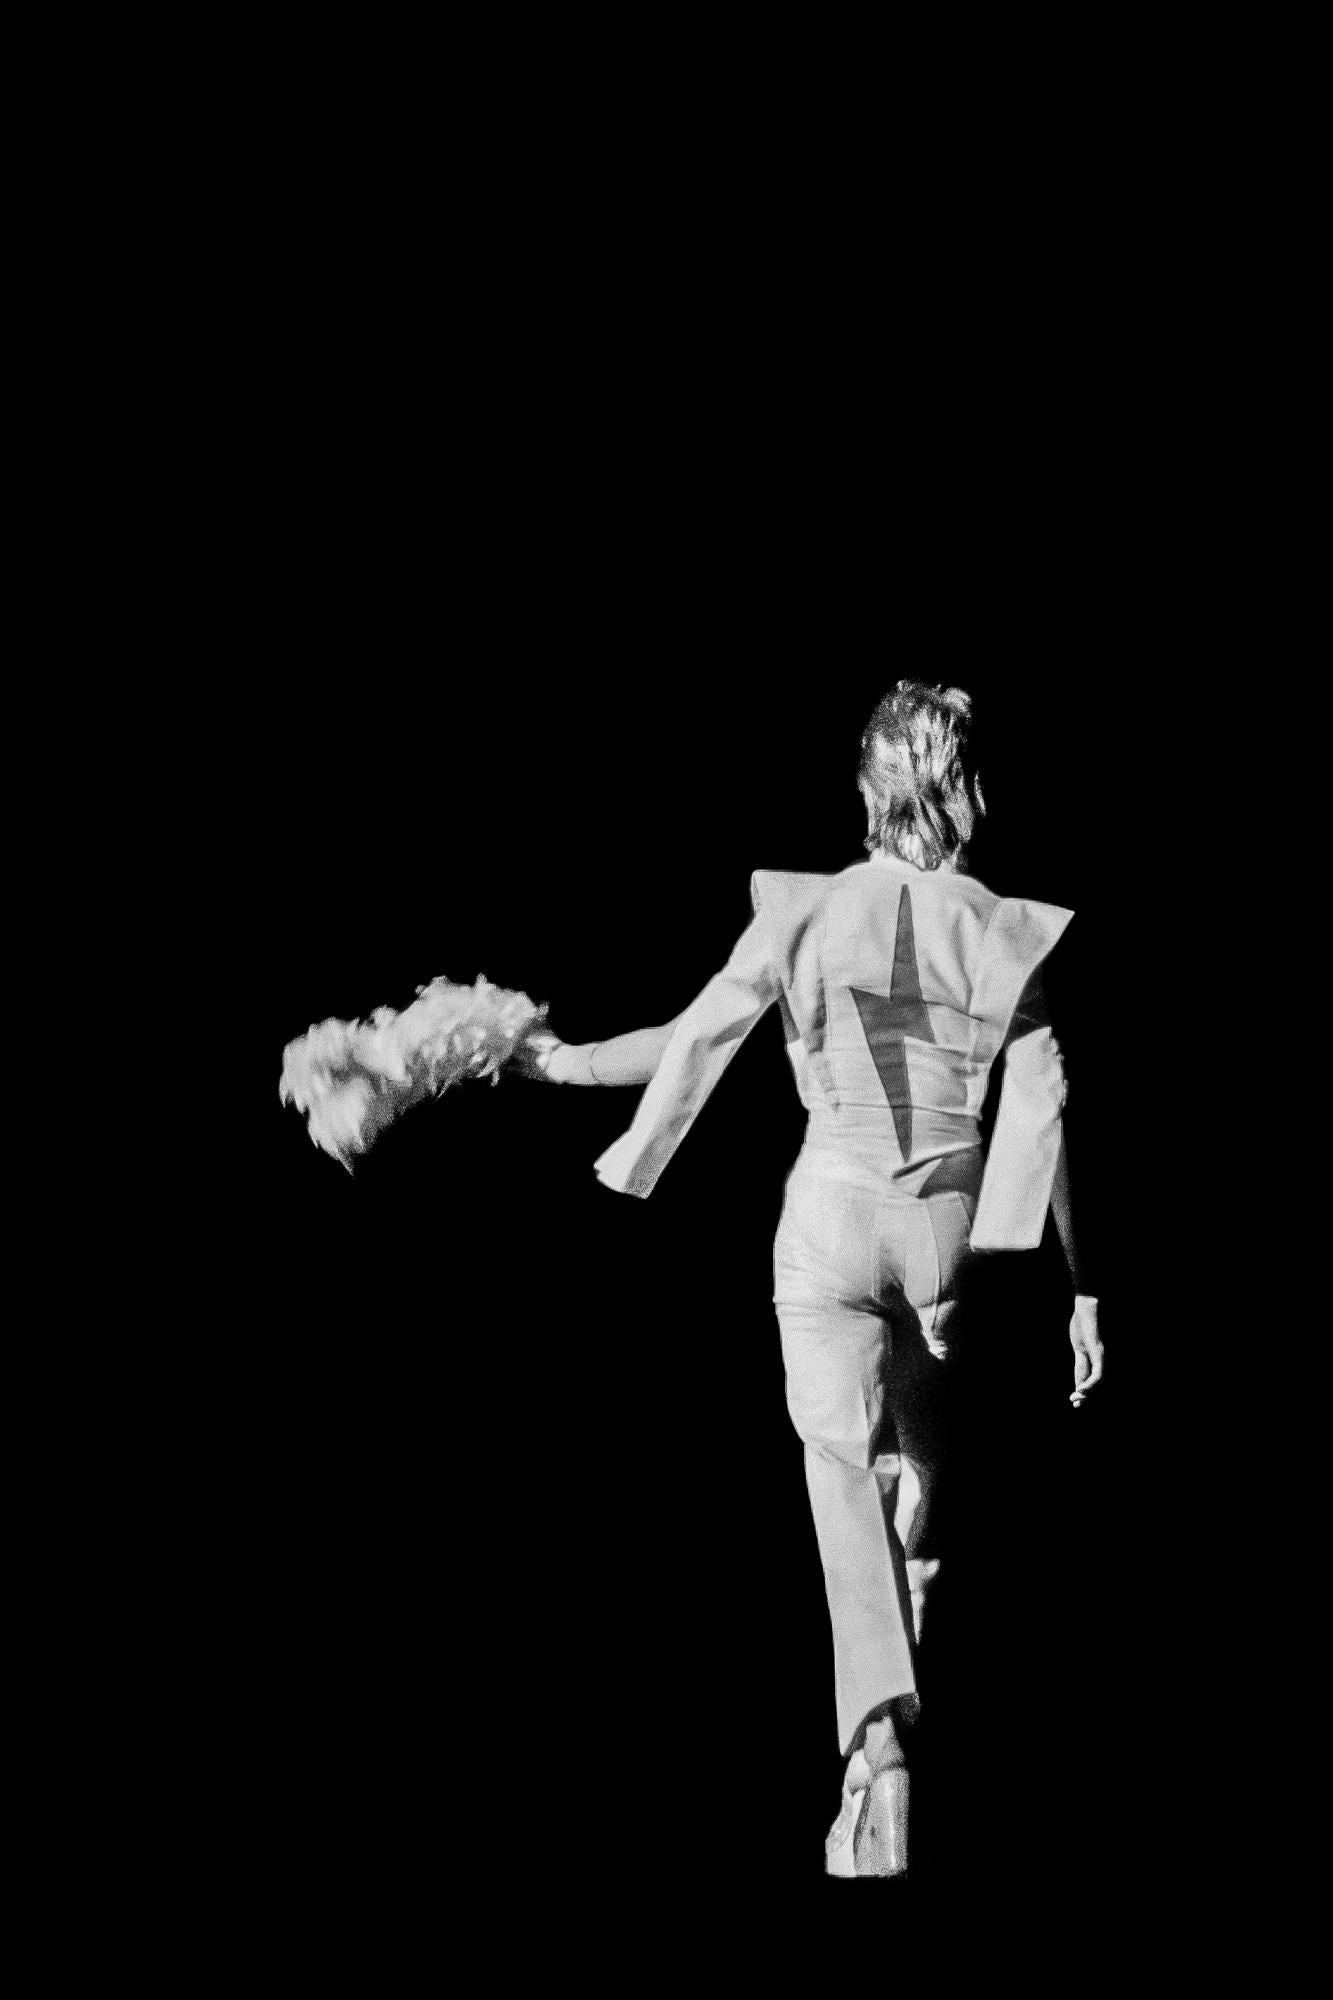 Fine art print of David Bowie by acclaimed photographer. Lynn Goldsmith. Taken in 1973 during the Spiders from Mars tour, and now available for the first time in black and white.

Lynn Goldsmith only produces 20 prints of her images, regardless of